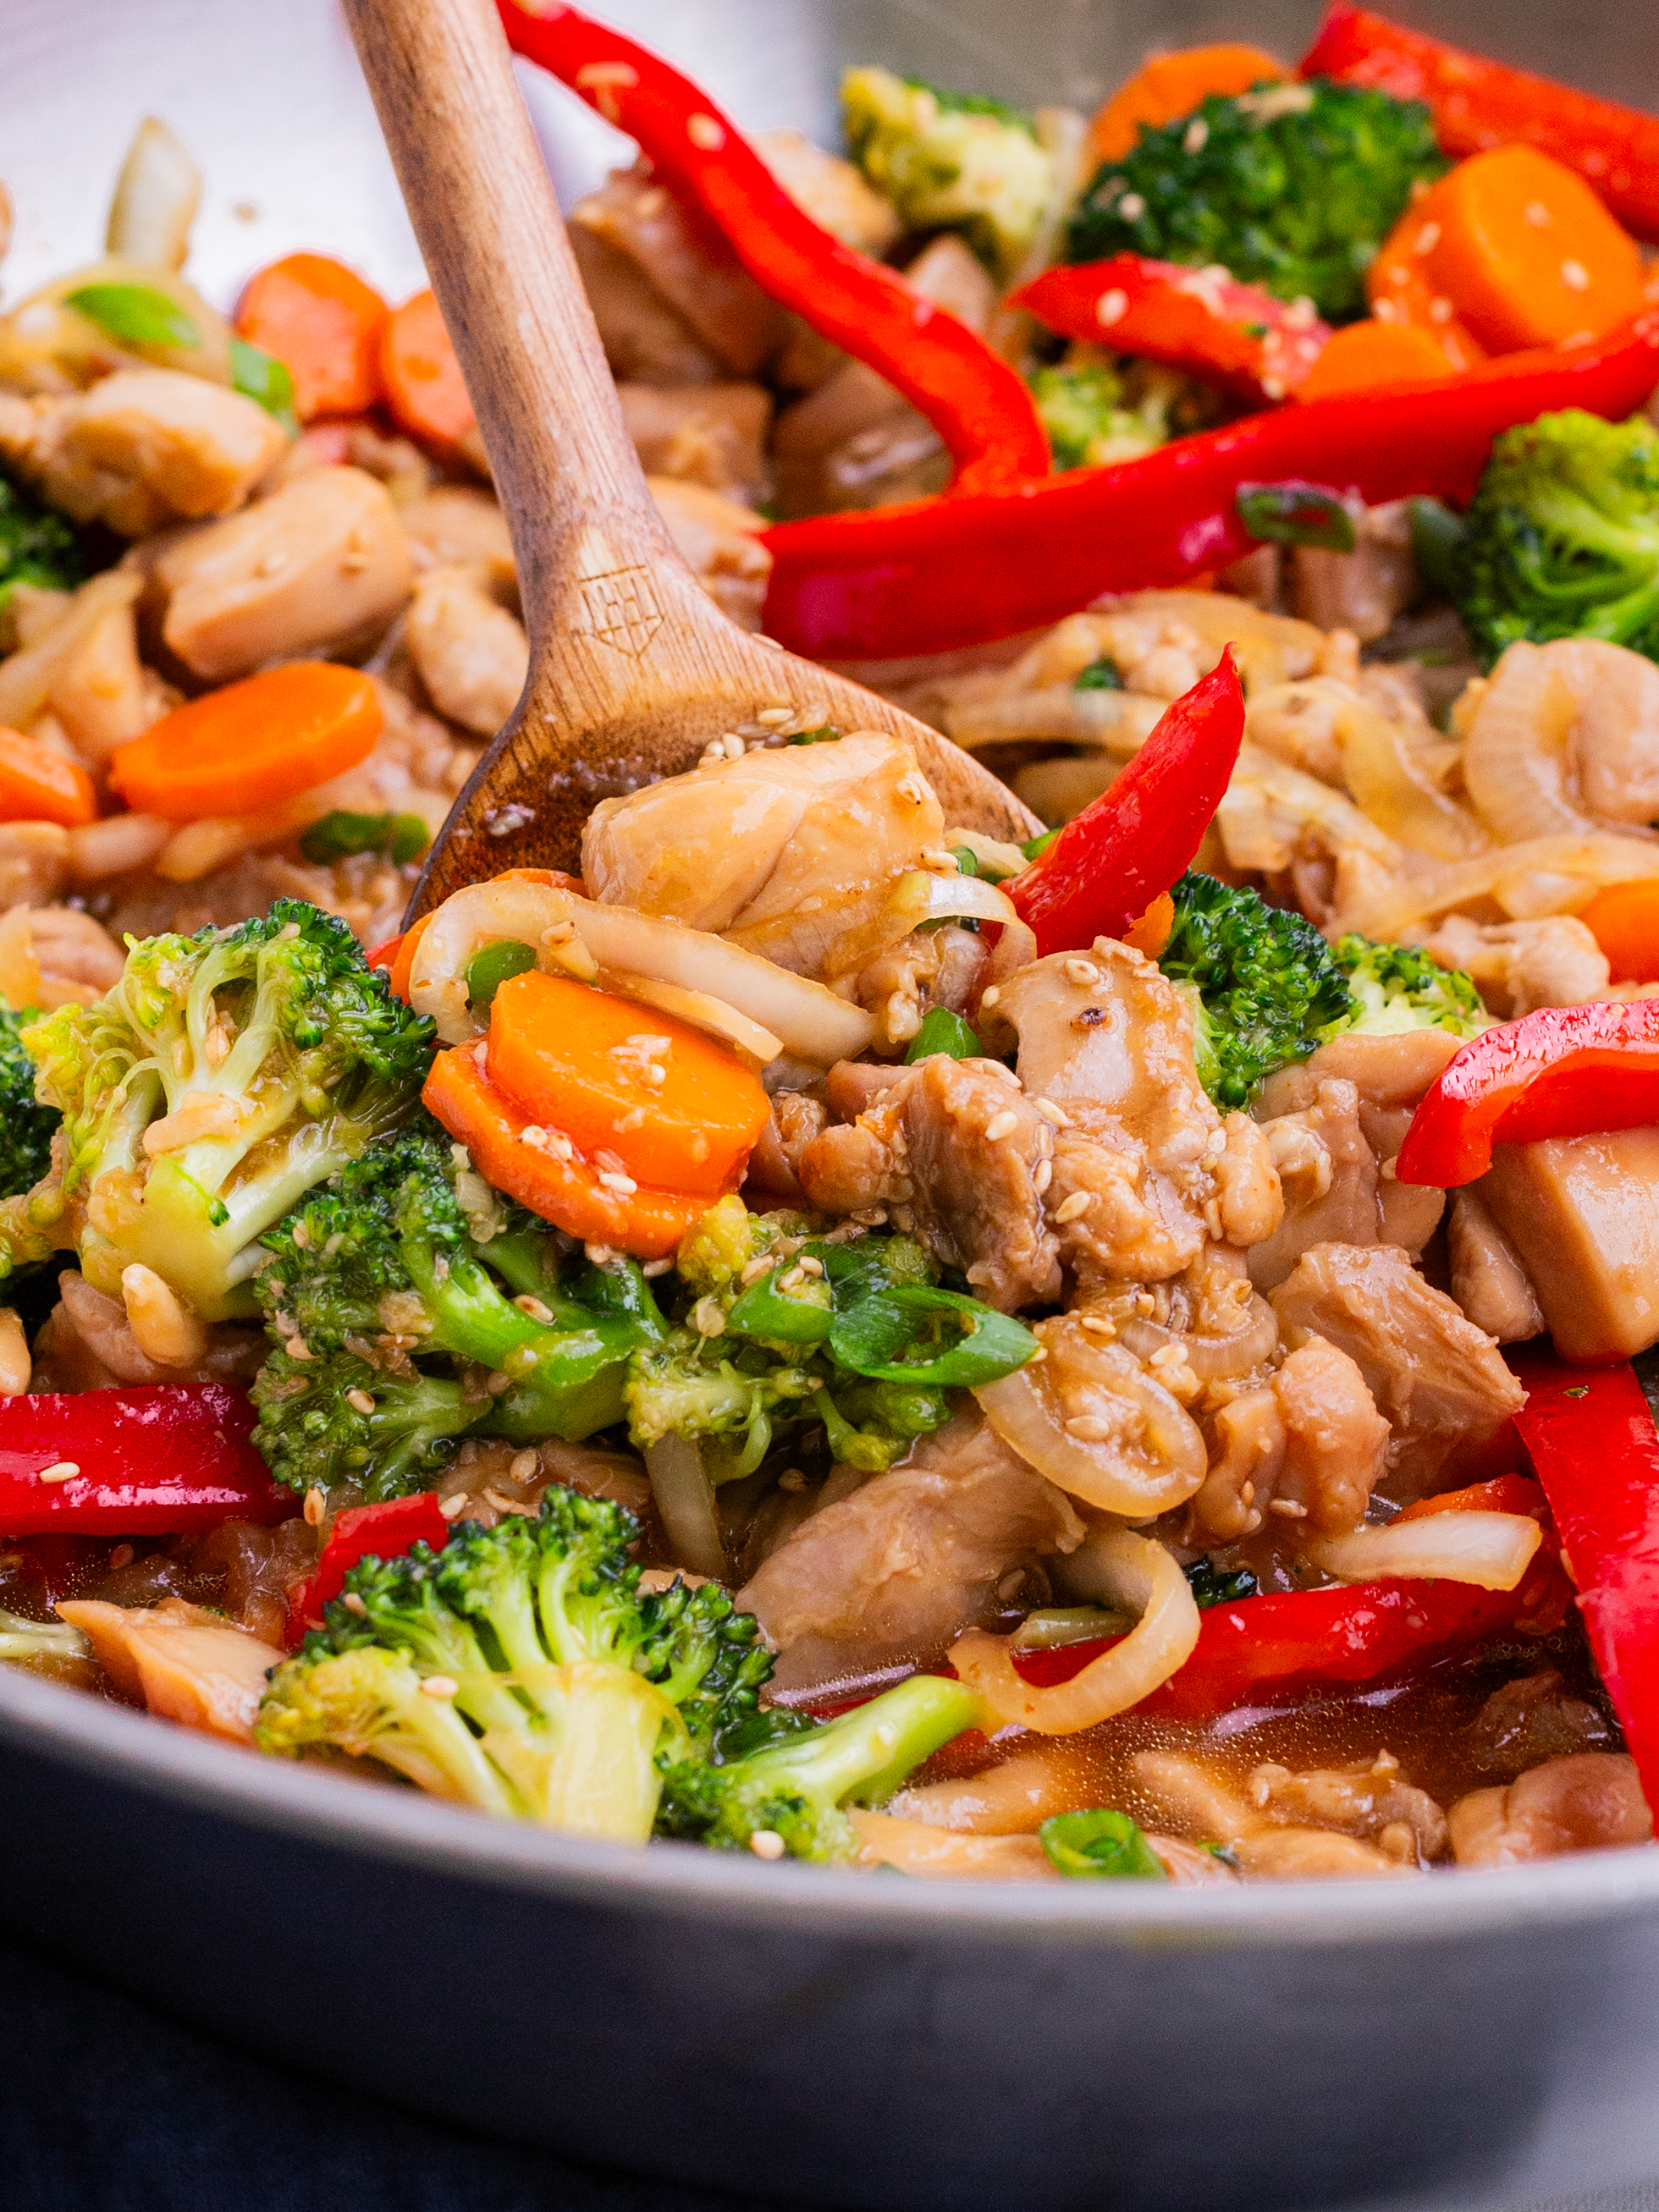 Chicken and veggies are simmered with a stir fry sauce in a skillet.